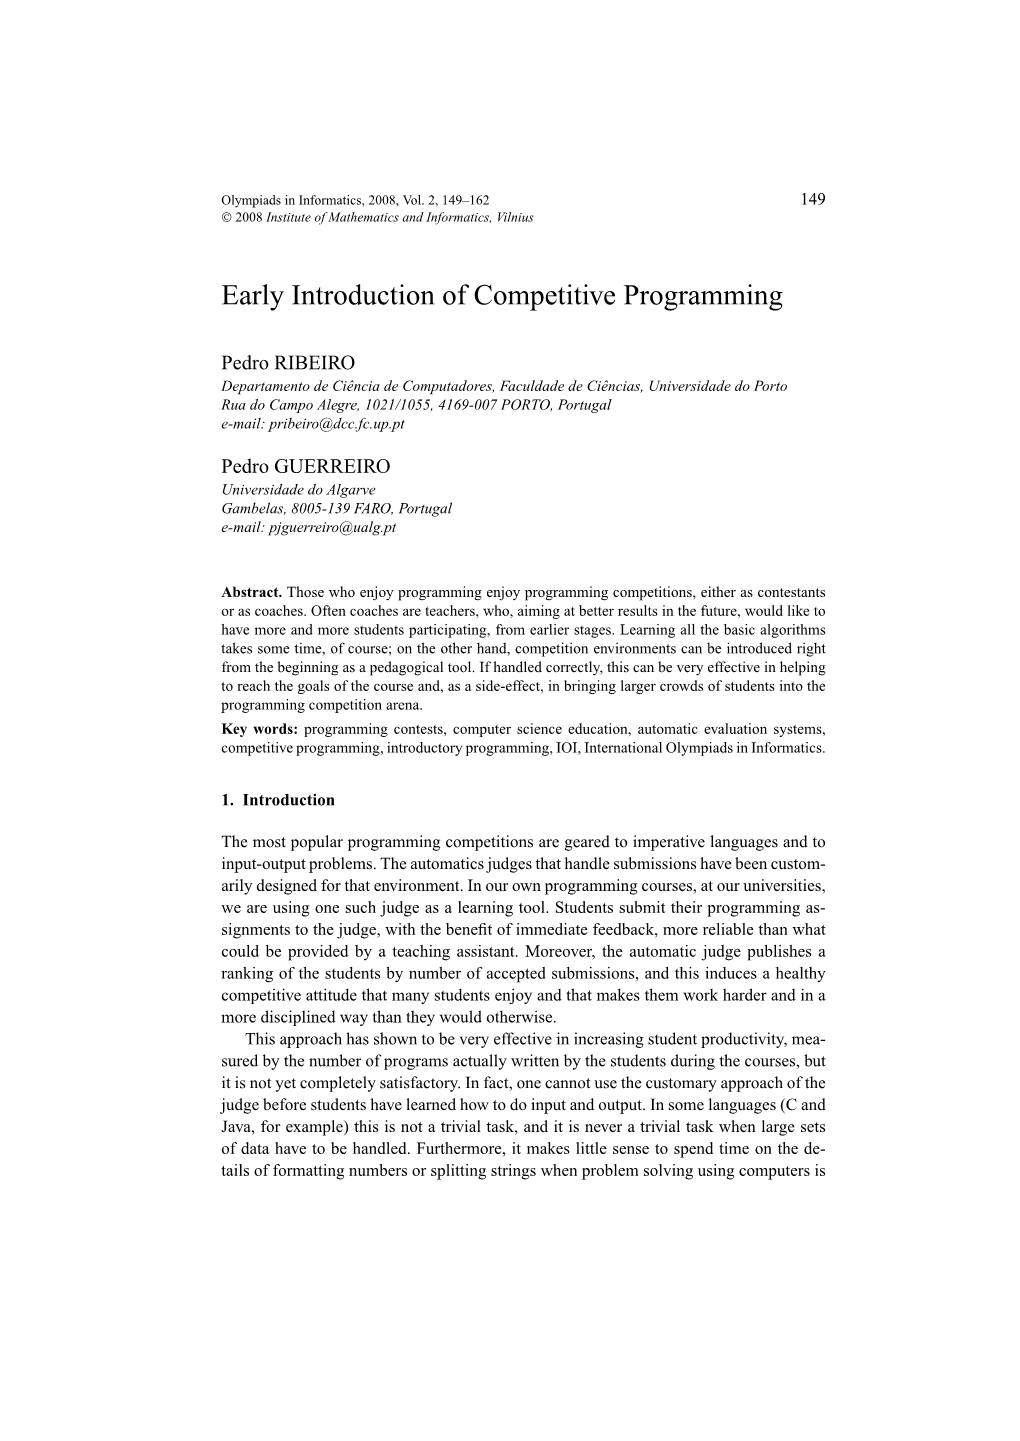 Early Introduction of Competitive Programming